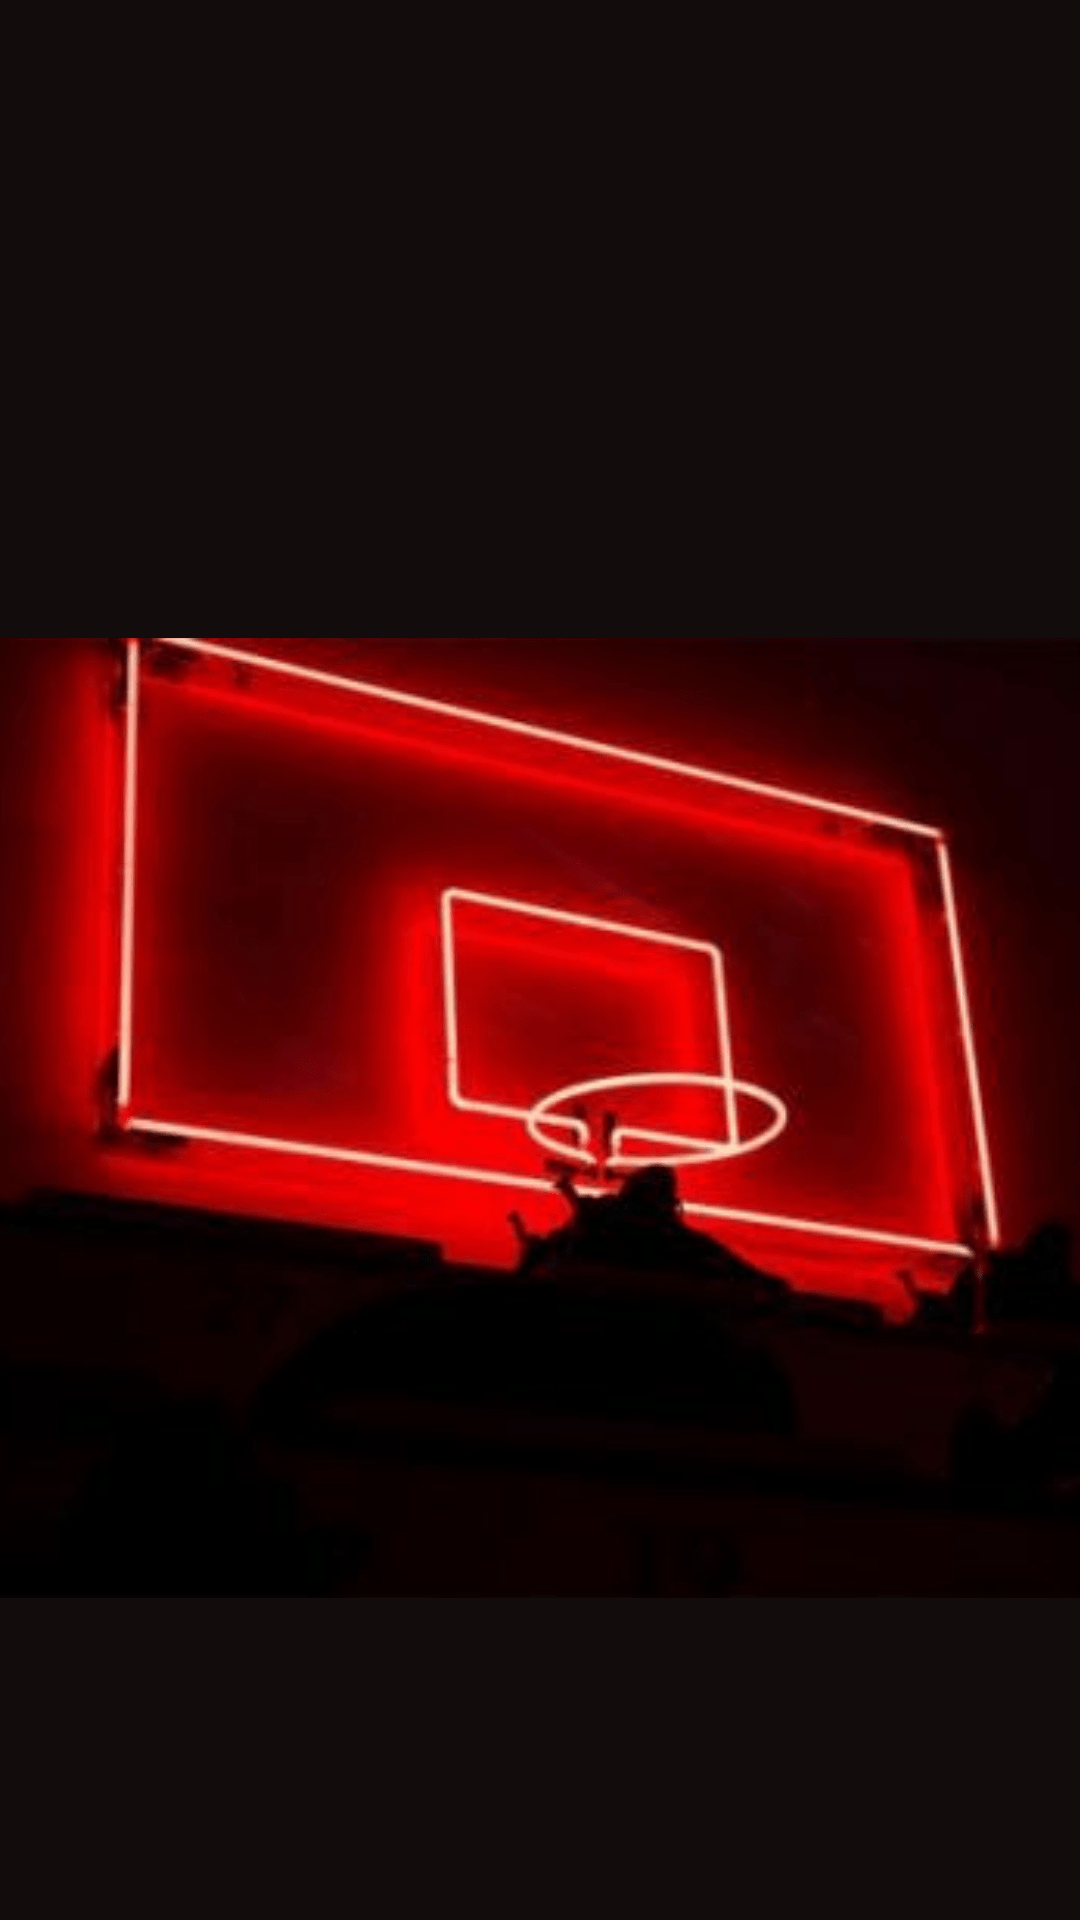 A red neon basketball backboard on a black background - Red, neon, iPhone red, neon red